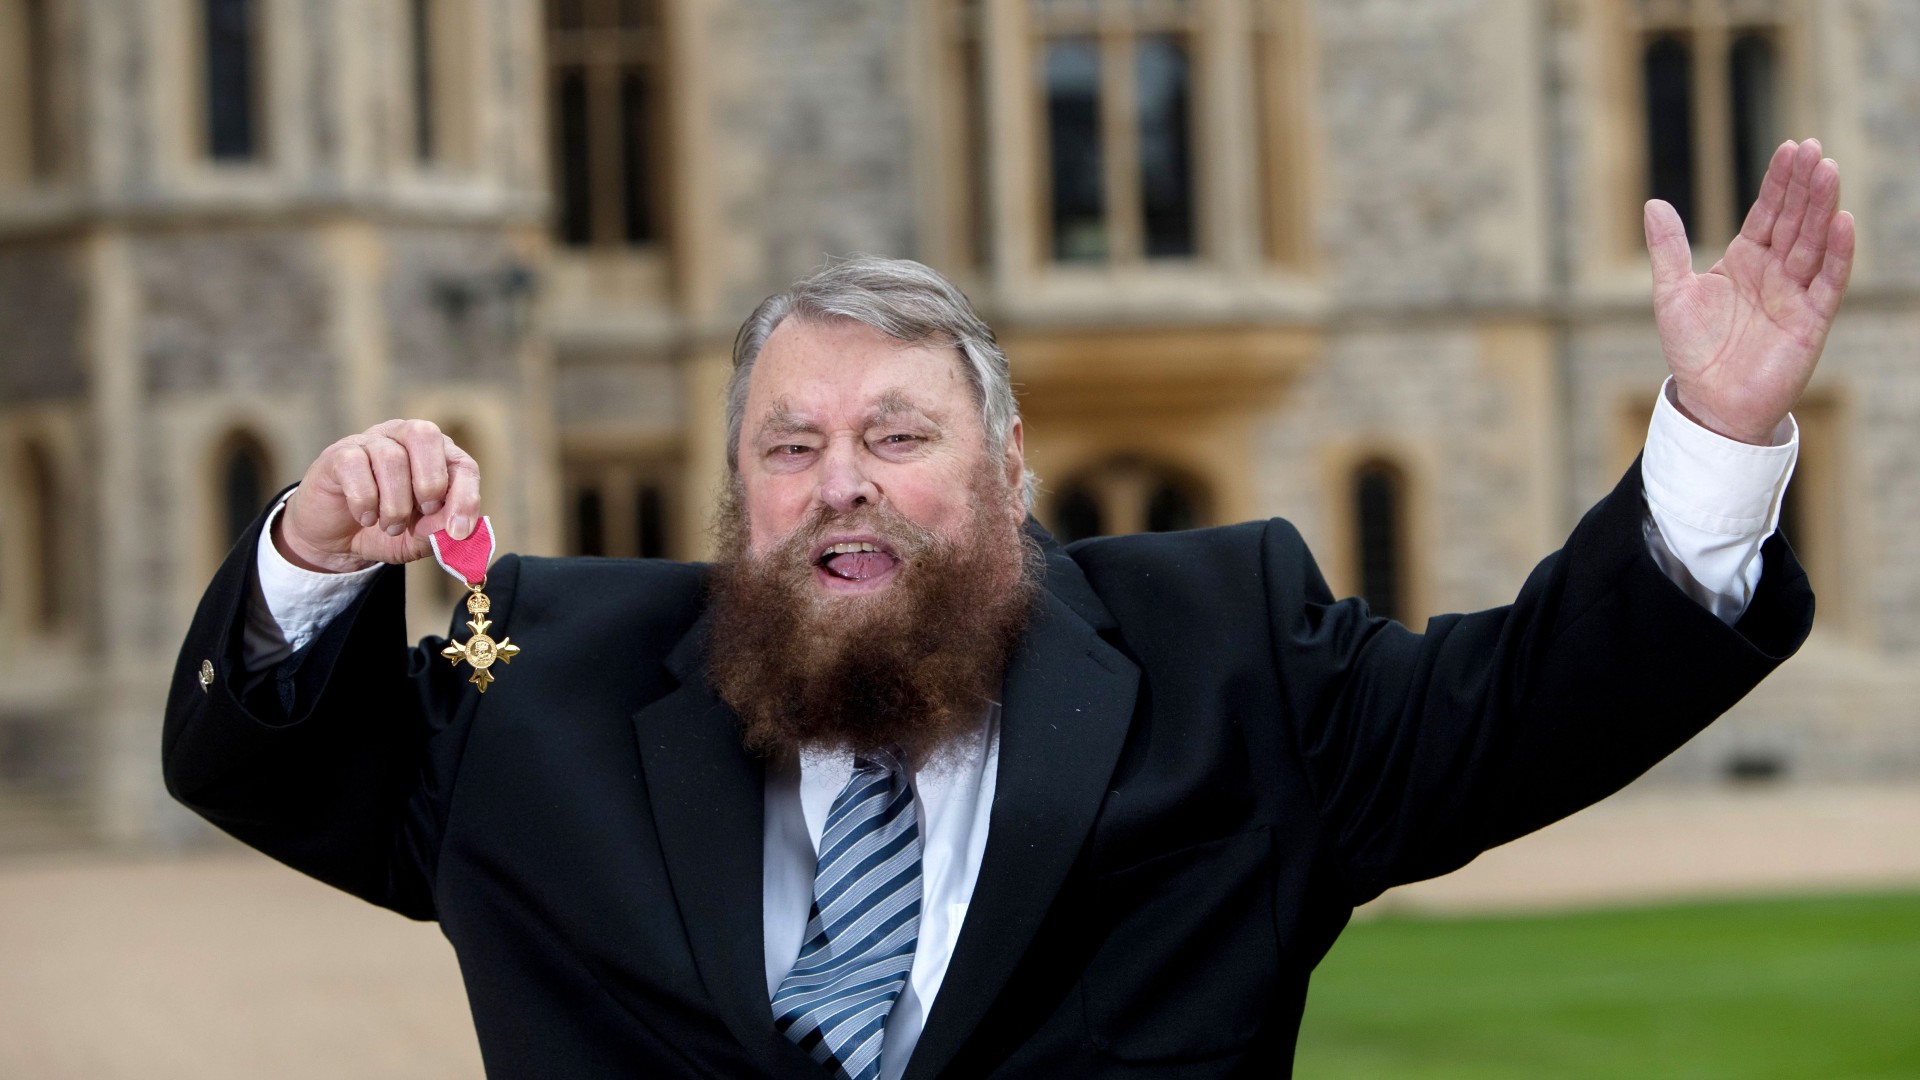 British Icon of the Week: Brian Blessed, the Larger Than Life Actor Who's a True Original